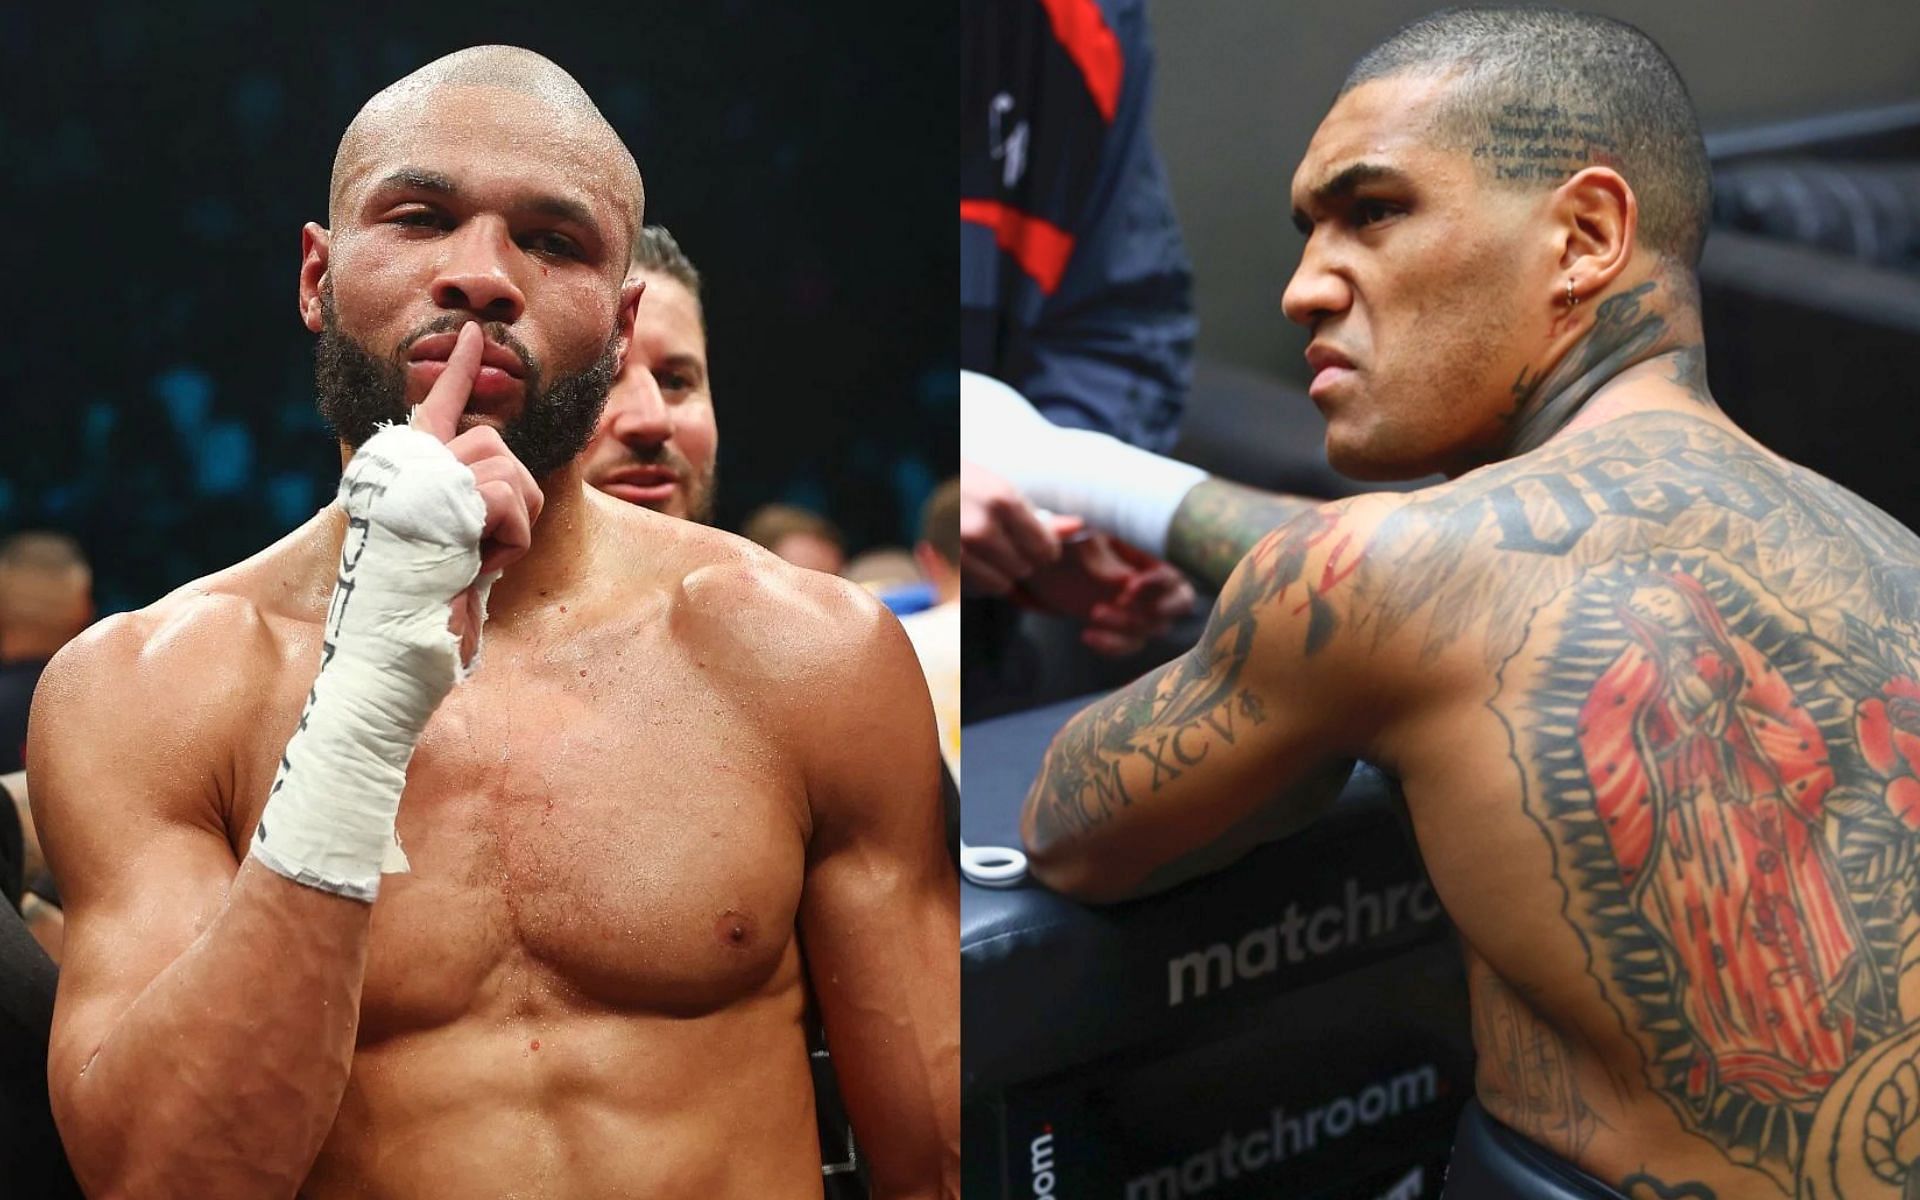 Chris Eubank Jr. (left) is a fight that means more than money to Conor Benn (right), says his promoter - Eddie Hearn [Images Courtesy: @GettyImages and @conorbennofficial on Instagram]